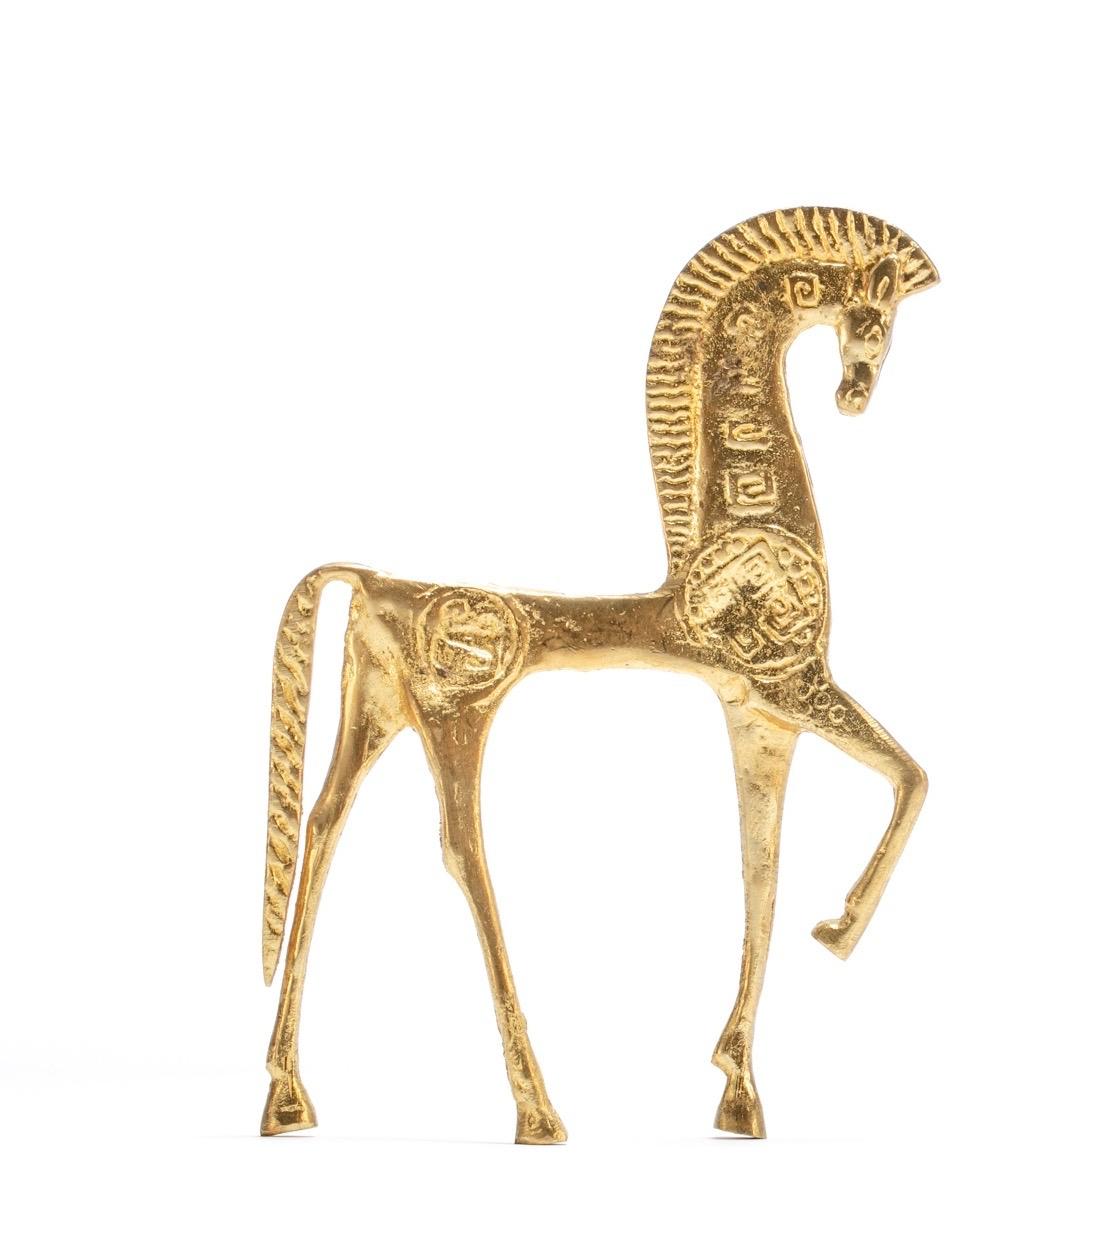 Freshly polished vintage Etruscan brass horse sculptures in the style of Frederic Weinberg, circa 1950s featuring etched modern details. These sculptures add a modern flair and look especially beautiful in bookcases, mantles or office. A thoughtful